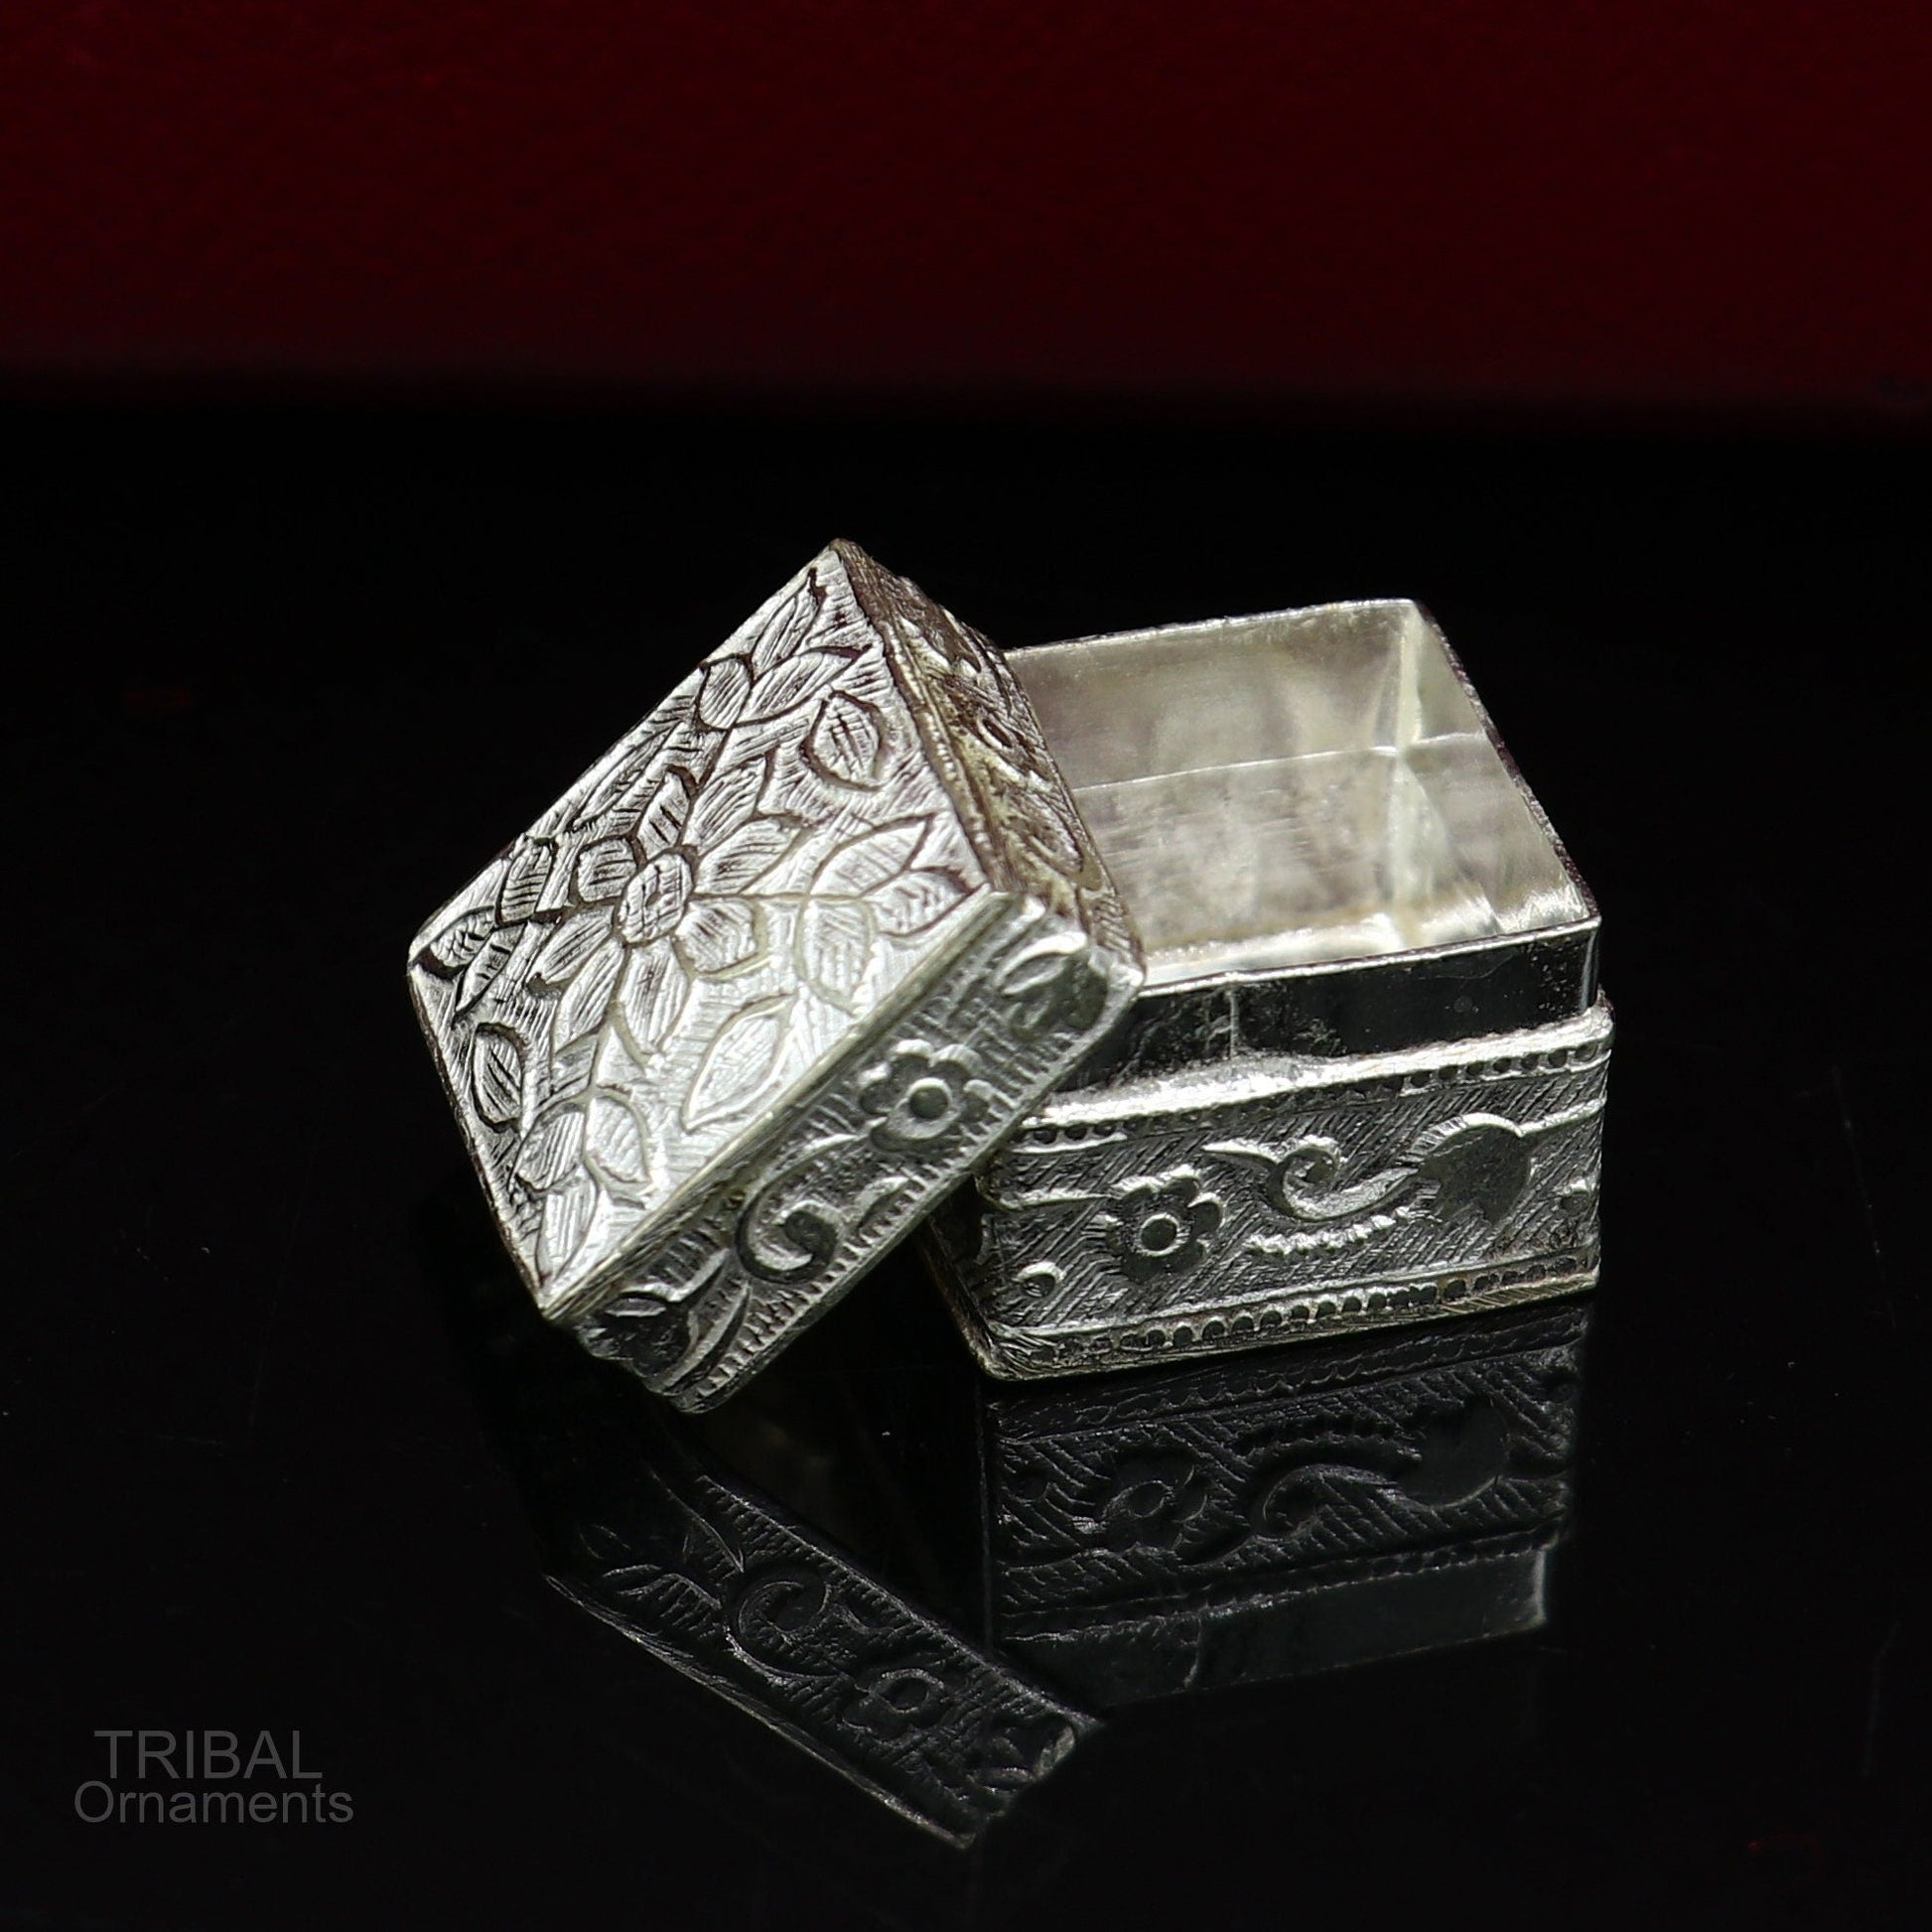 vintage style small bridal queen sterling silver trinket box or eyes kajal box, container box, small jewelry box, bridal art gifting  stb129 - TRIBAL ORNAMENTS